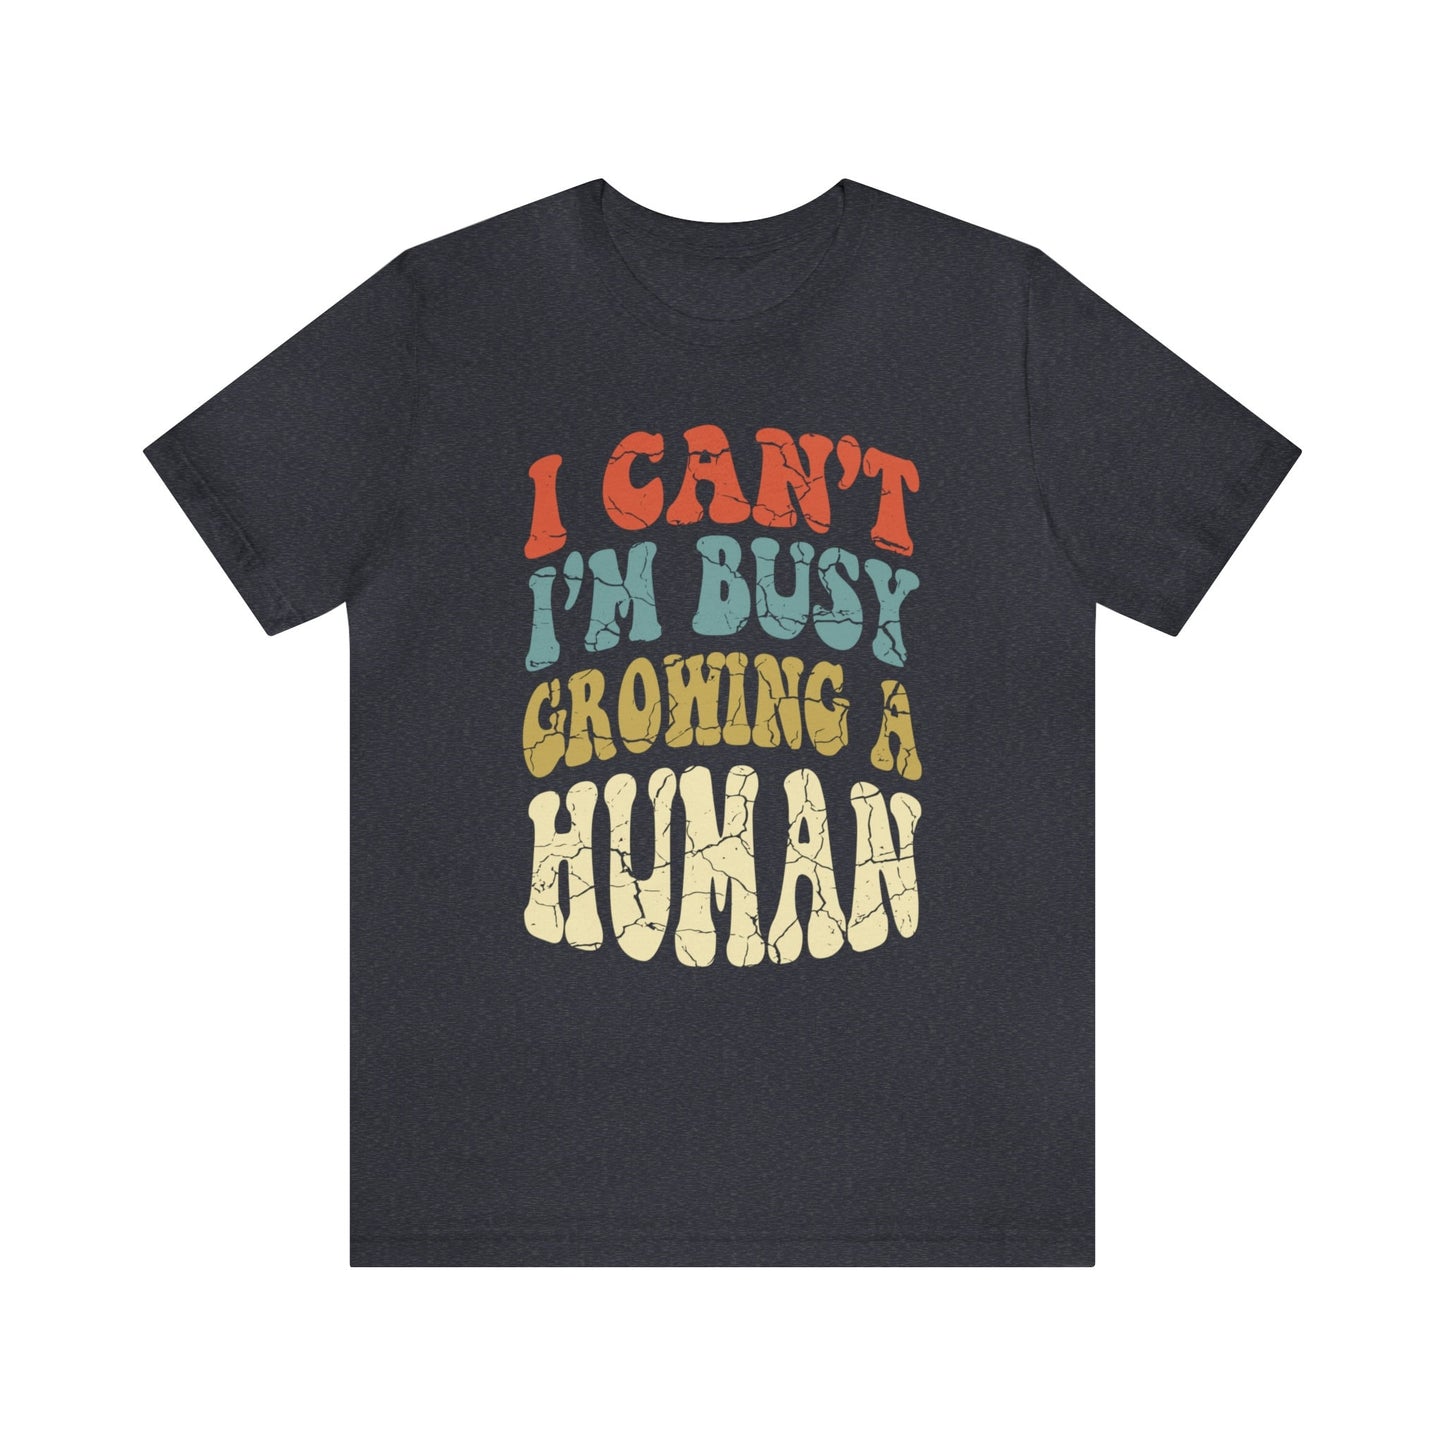 Funny Mom Gift T-Shirt, Growing a Human tee, Funny Pregnancy Announcement Shirt - 37 Design Unit